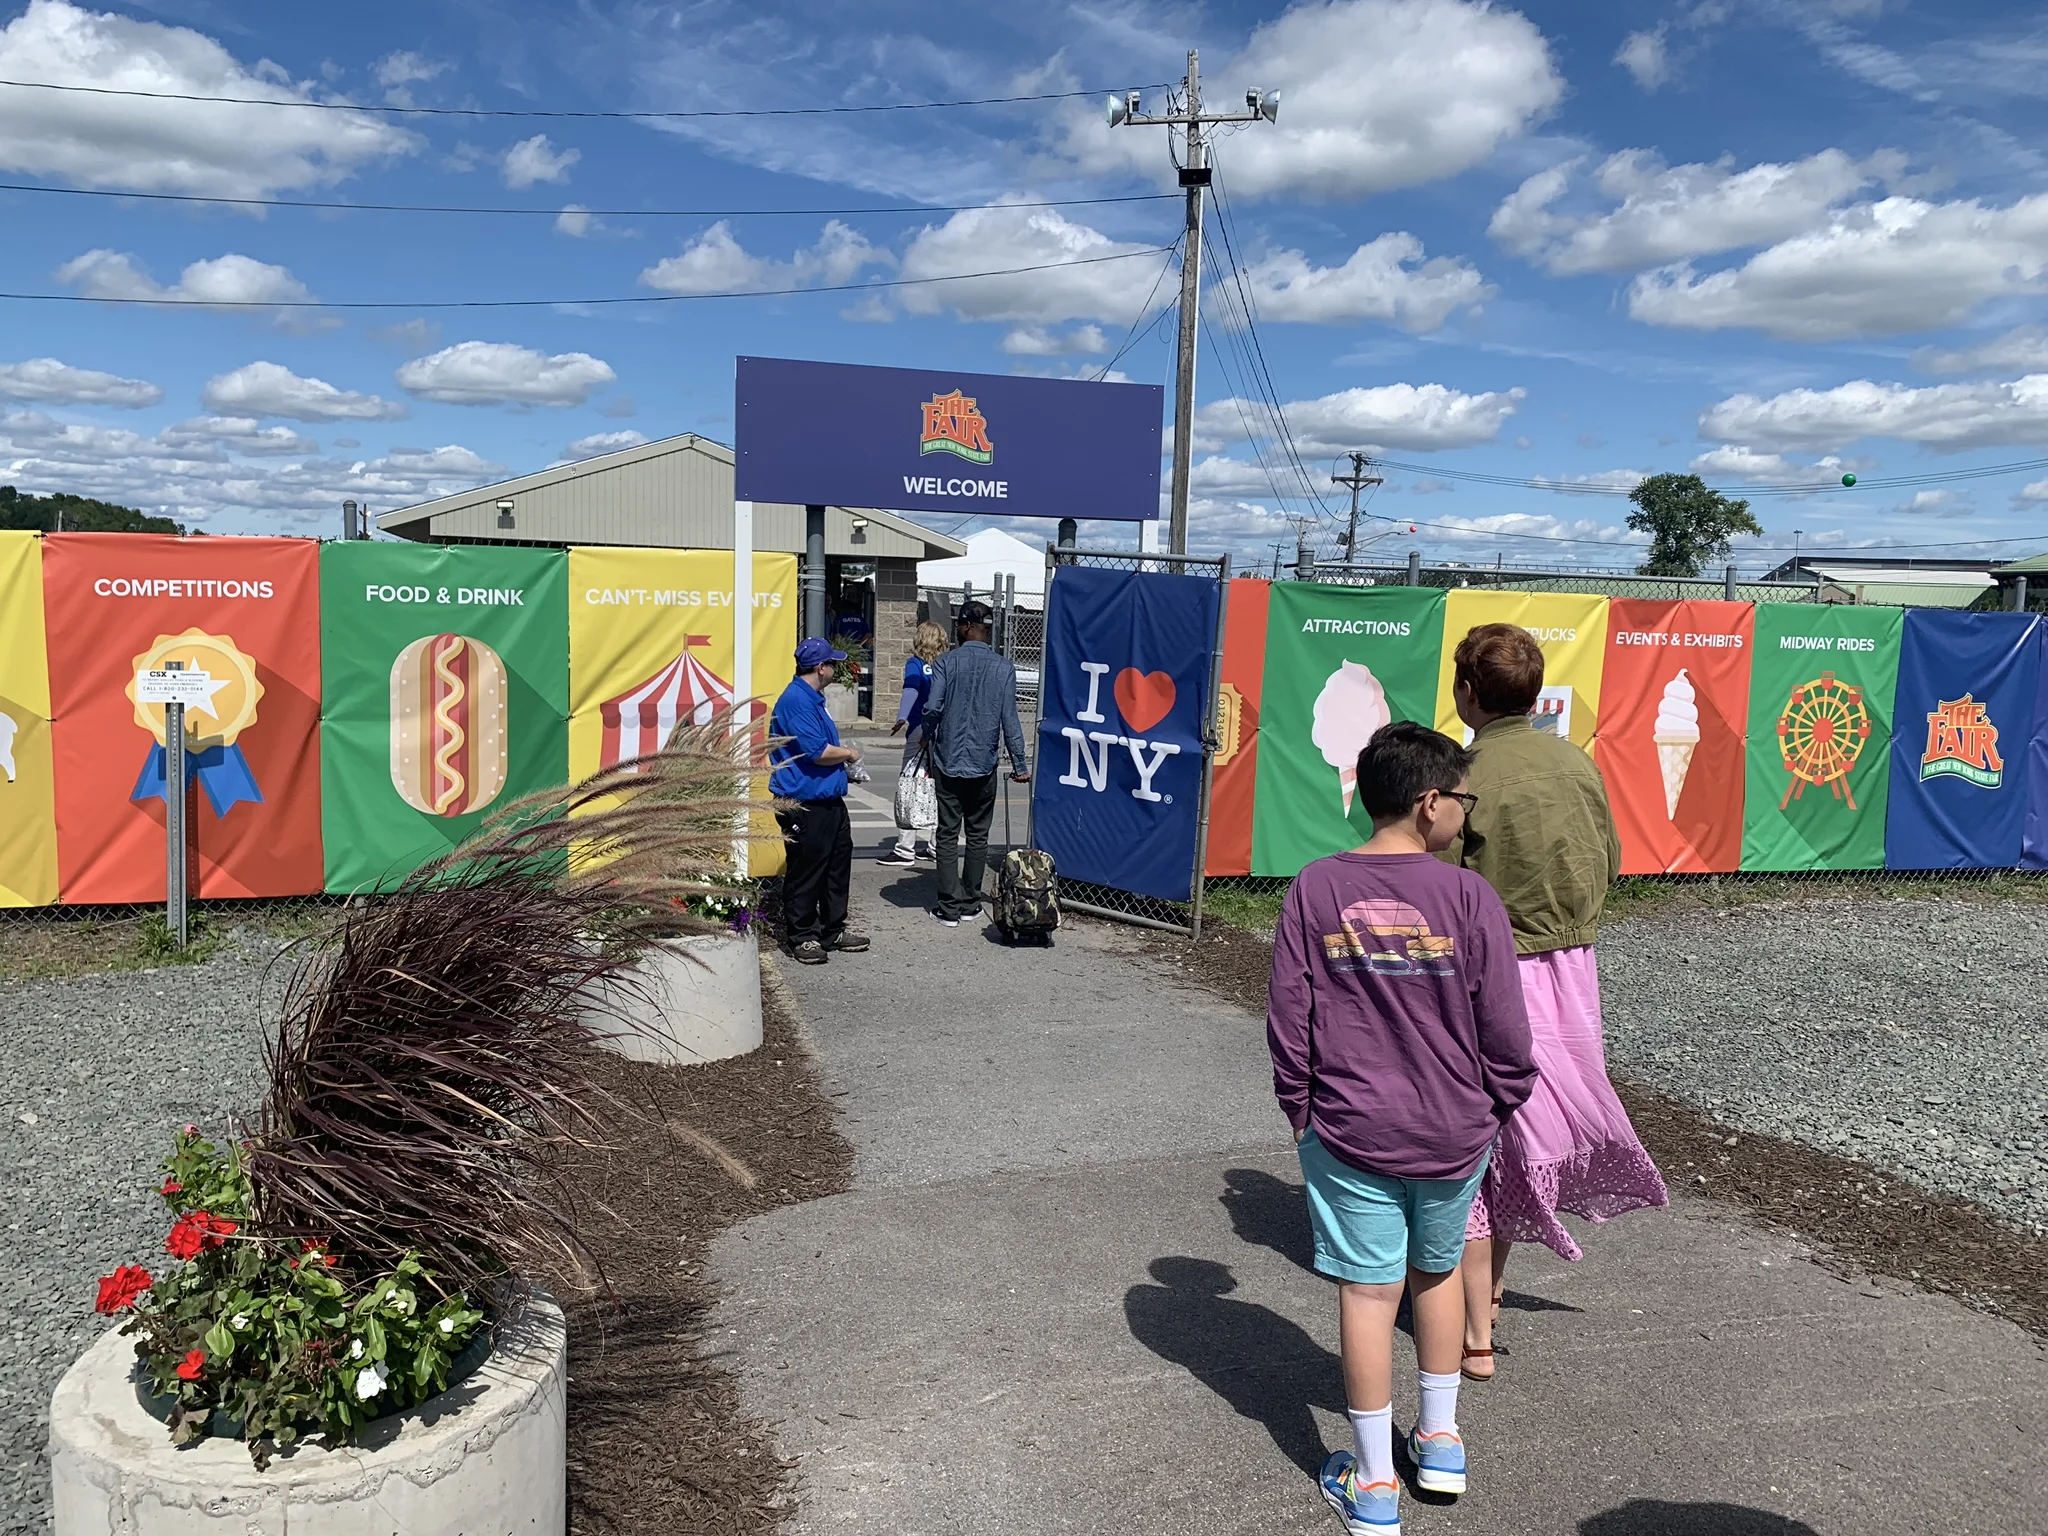 Entrance to the NY State Fair